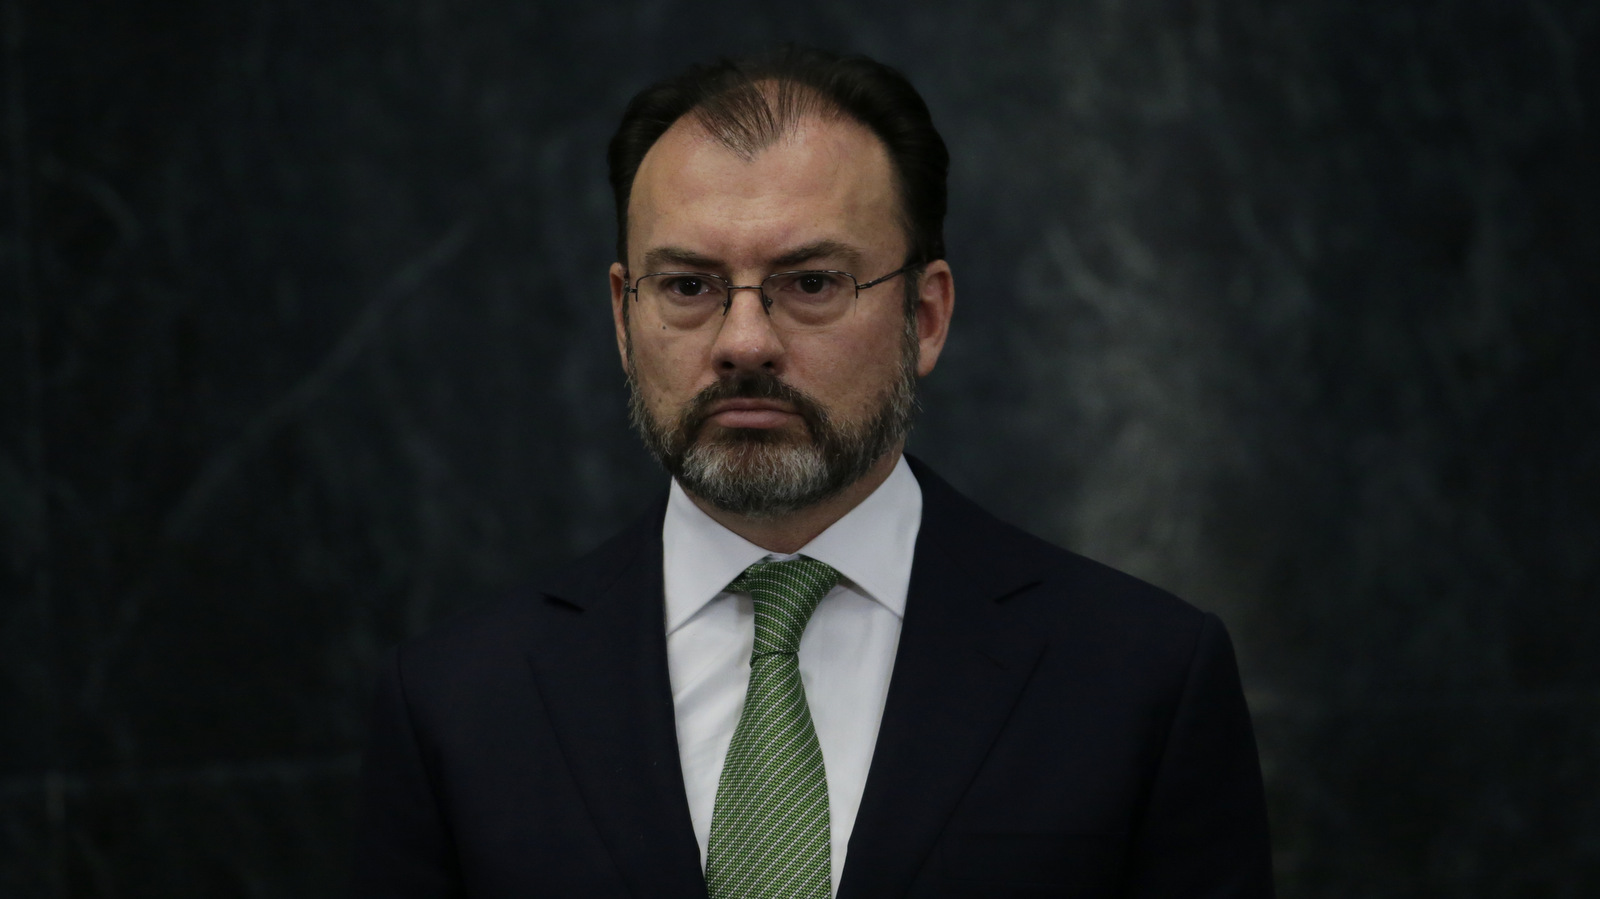 Mexico's new Foreign Relations Secretary Luis Videgaray stands during a press conference at the Los Pinos presidential residence in Mexico City. Videgaray said Tuesday, Jan. 10, that the country isn’t only willing to negotiate changes to the North American Free Trade Agreement, it wants negotiations as soon as possible. (AP/Marco Ugarte)